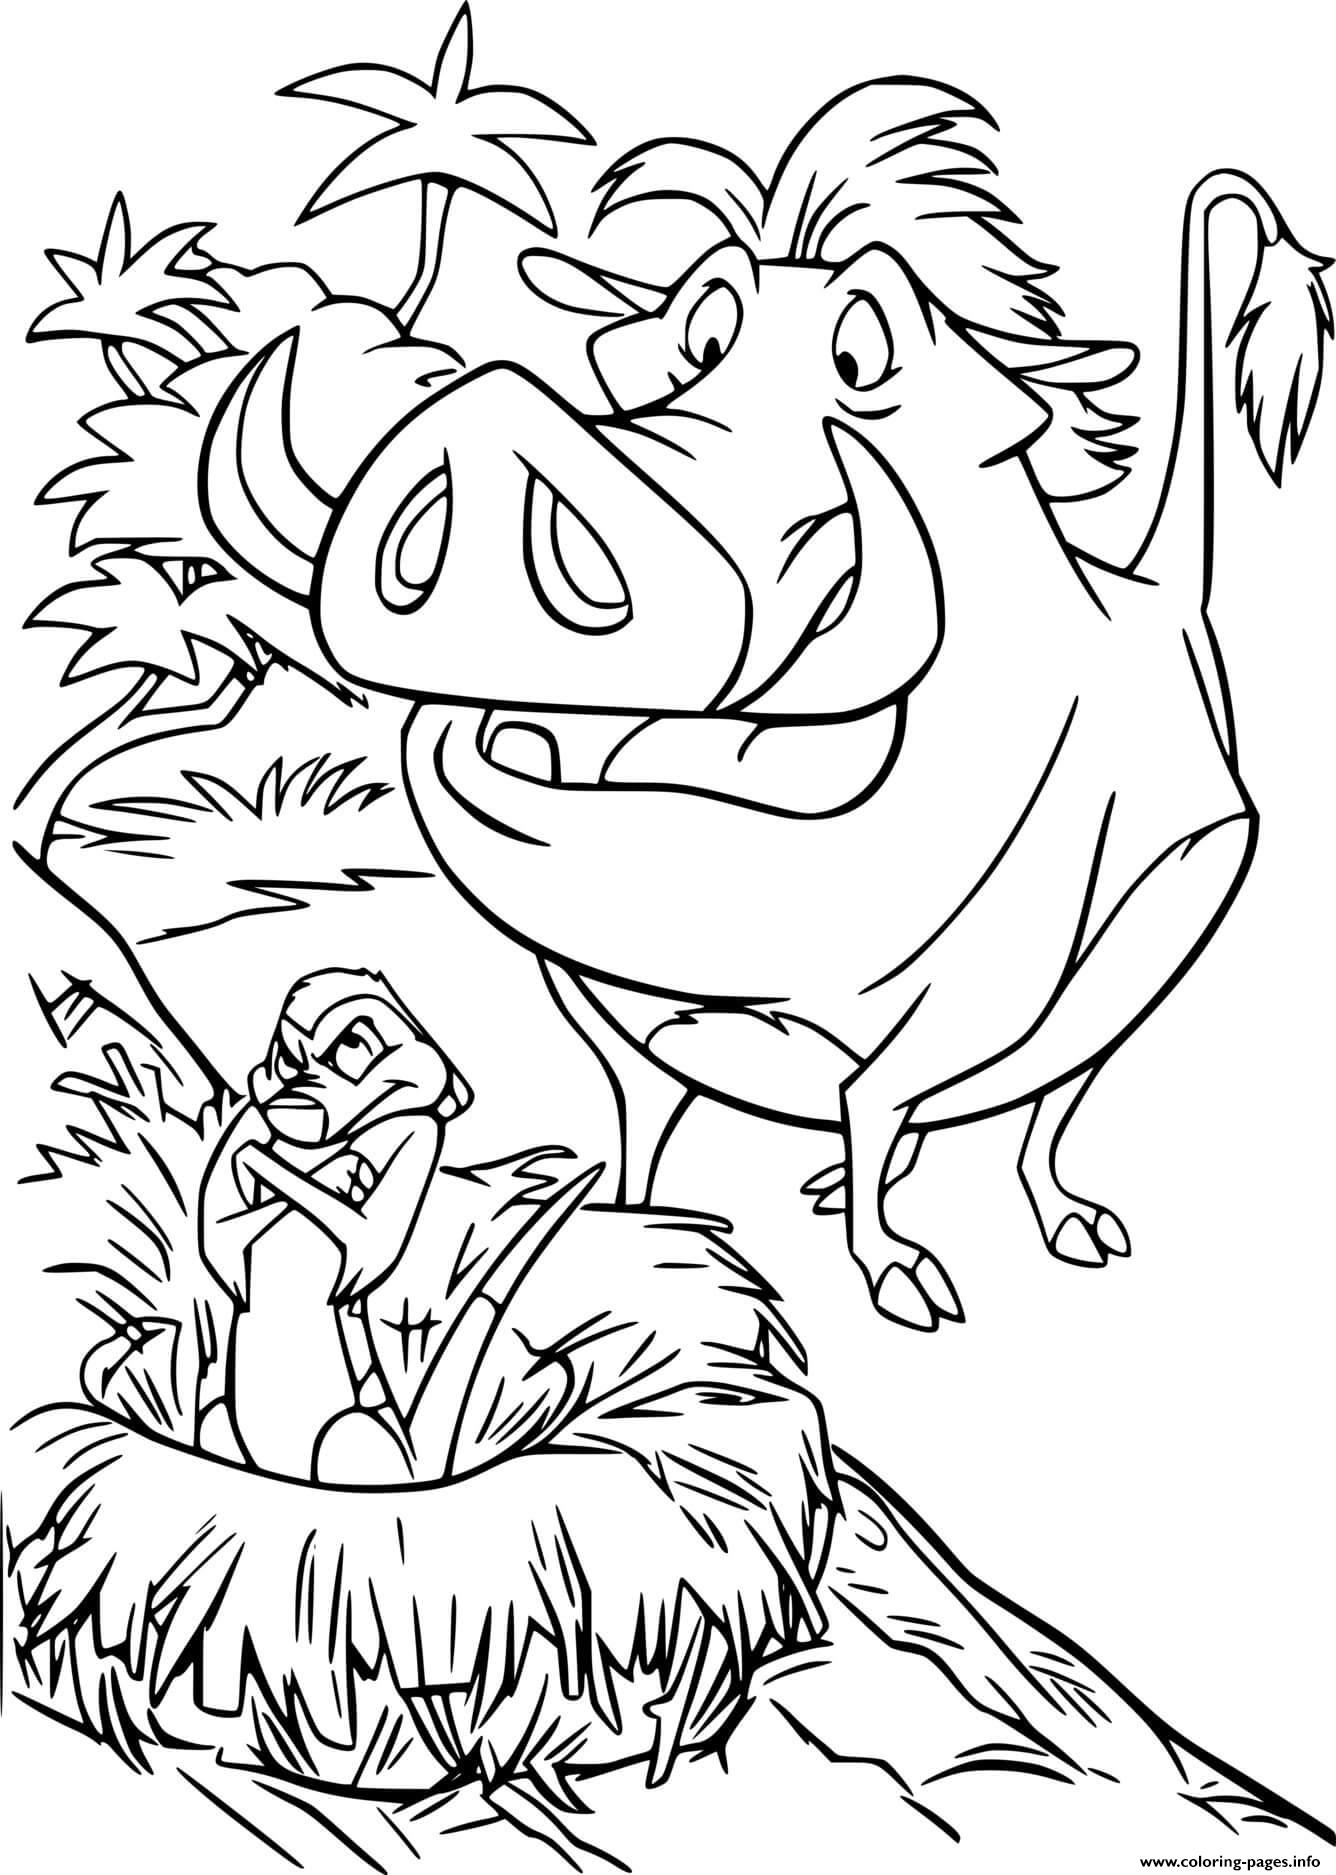 Timon Is Angry With Pumbaa coloring